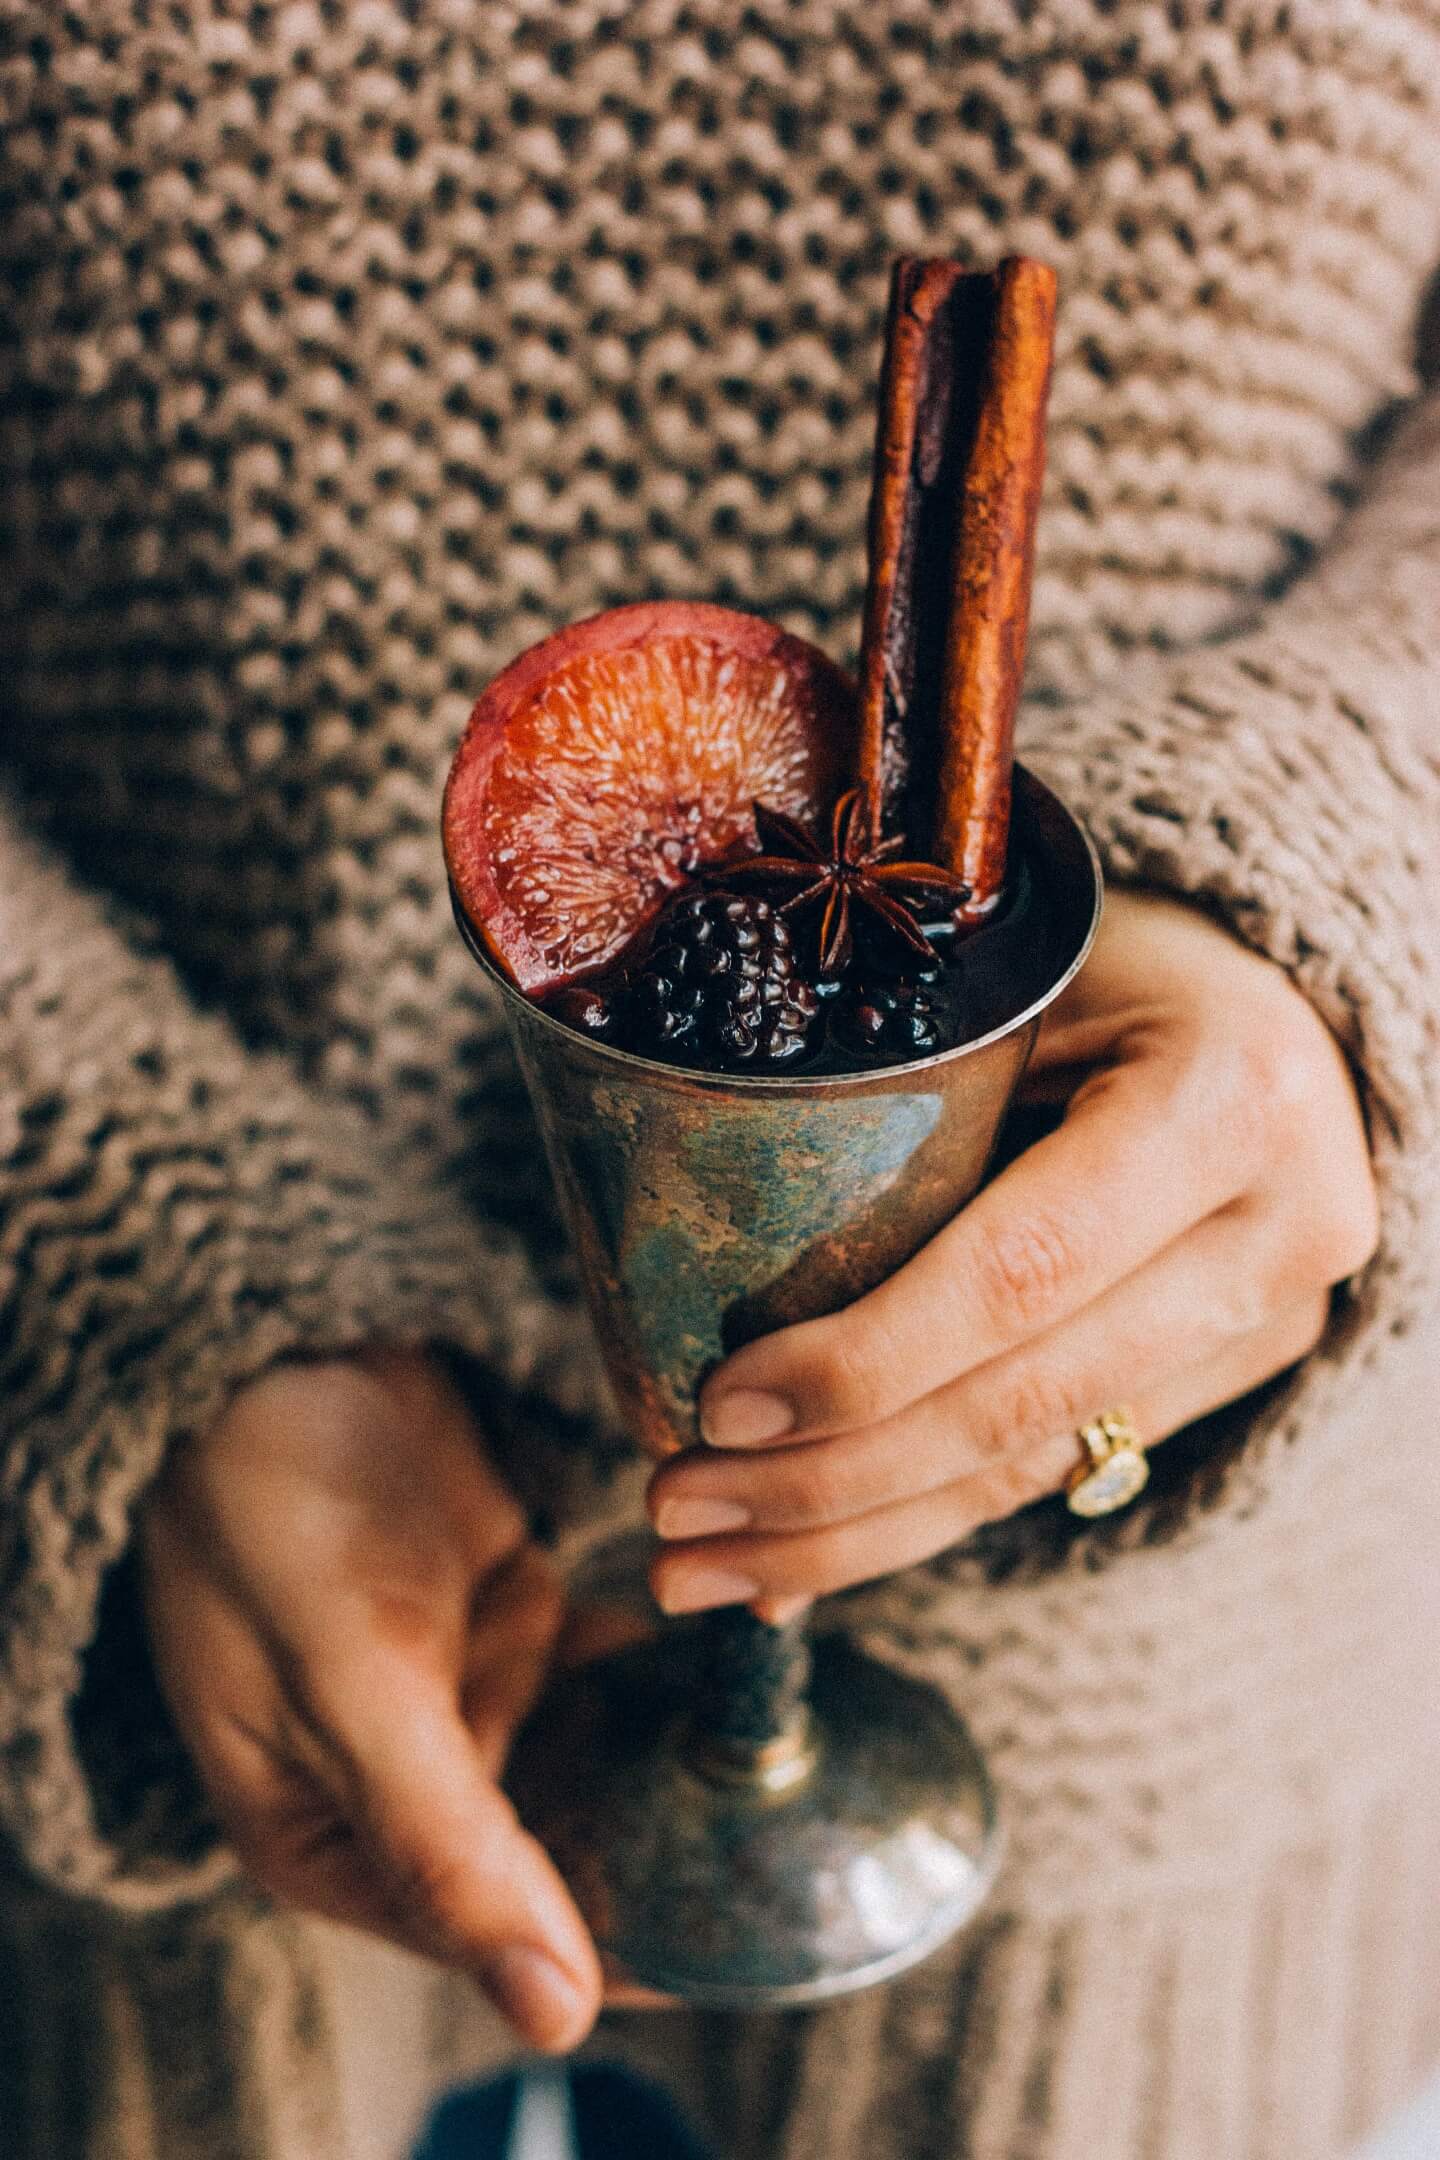 Blackberry Mulled Wine | 5 variations for the good ol' winter favorite - the mulled wine! Click through for my picks of the comforting winter drink